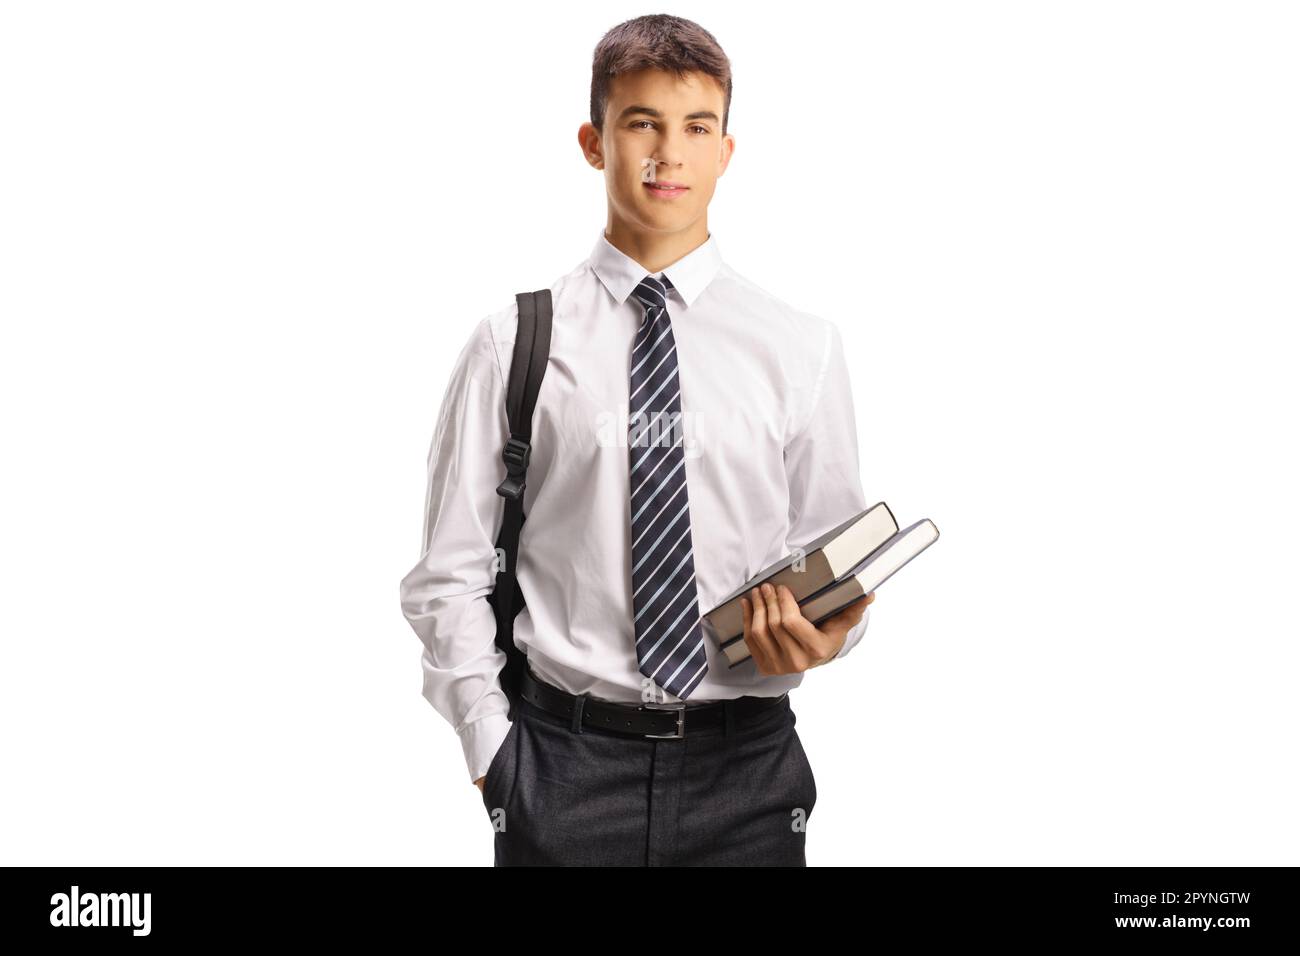 Male teen student in a school uniform holding books isolated on white background Stock Photo